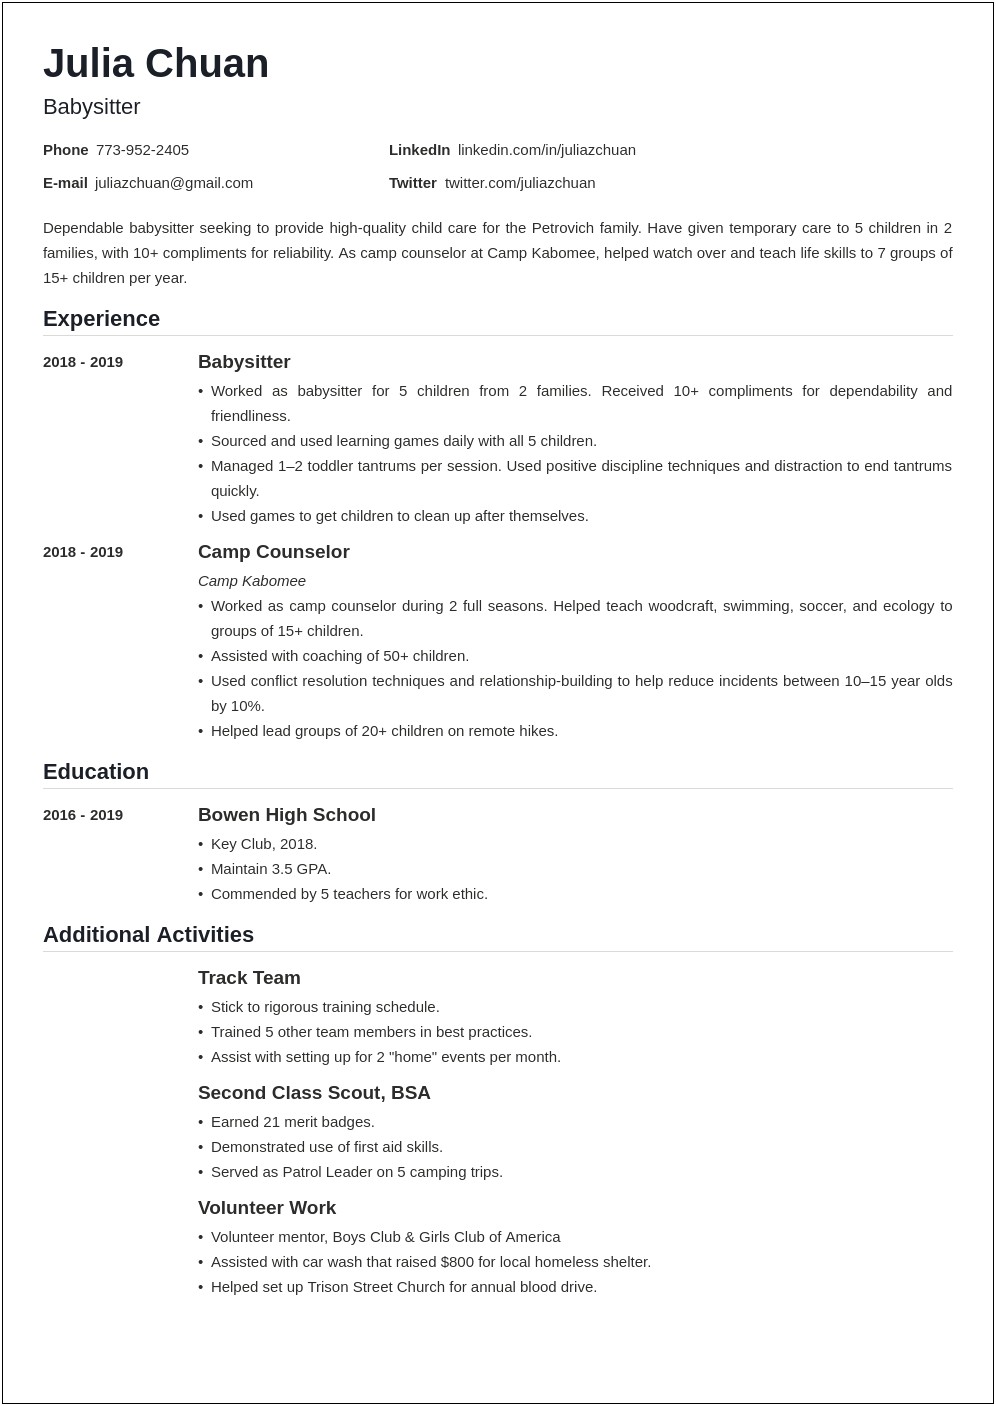 Samples Of Resumes Using A Previous Experience Section